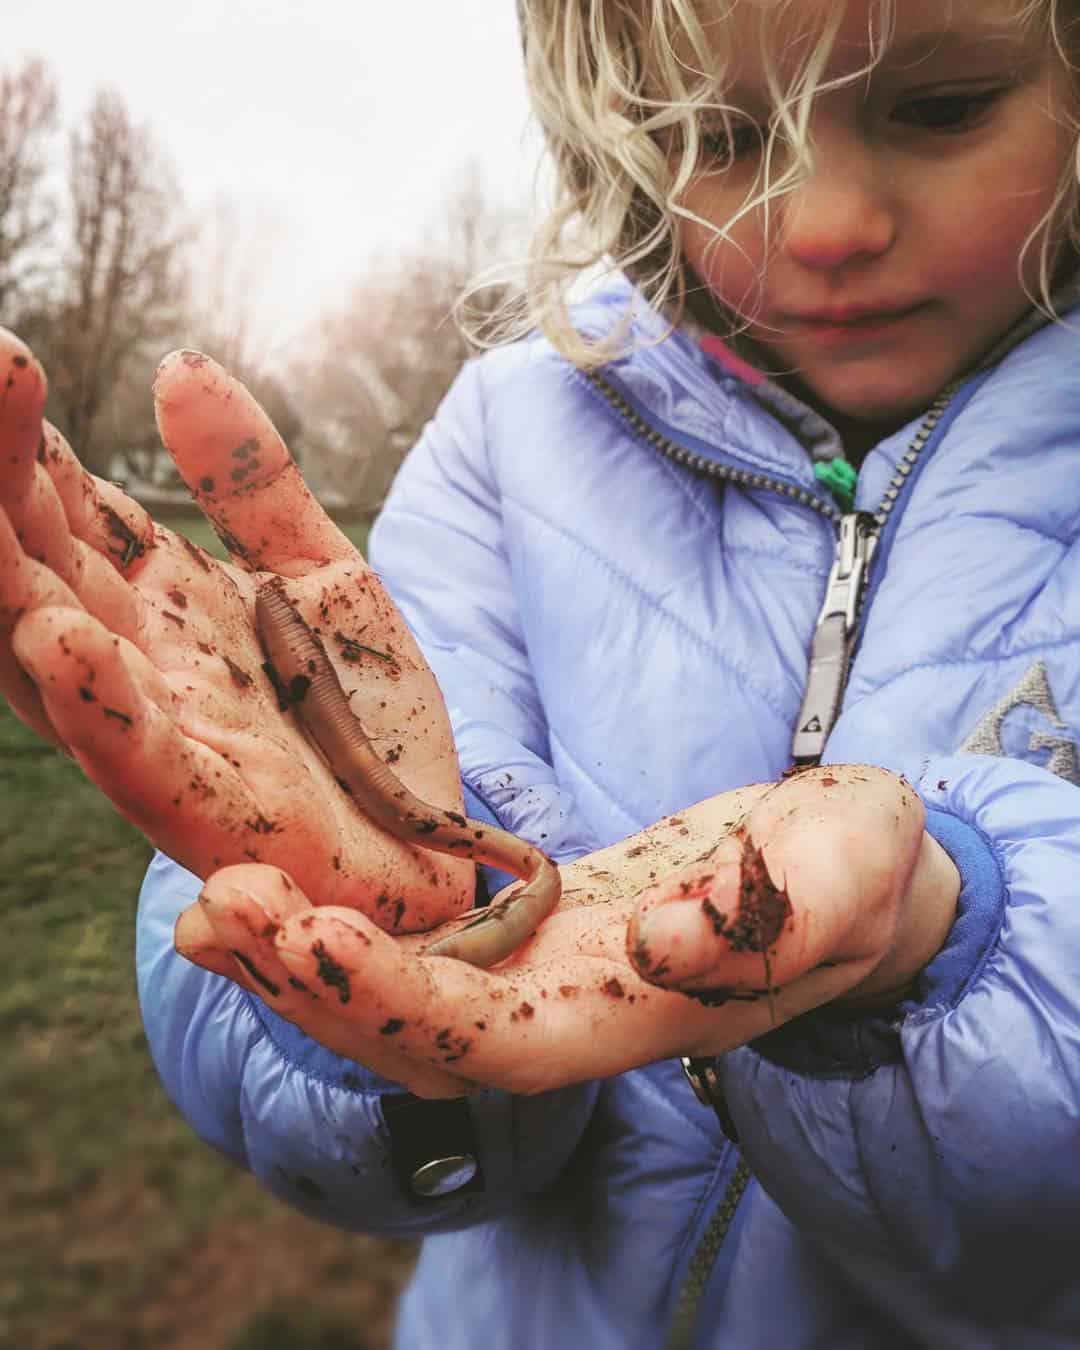 how to help your child get over their fear of worms, bees and other insects